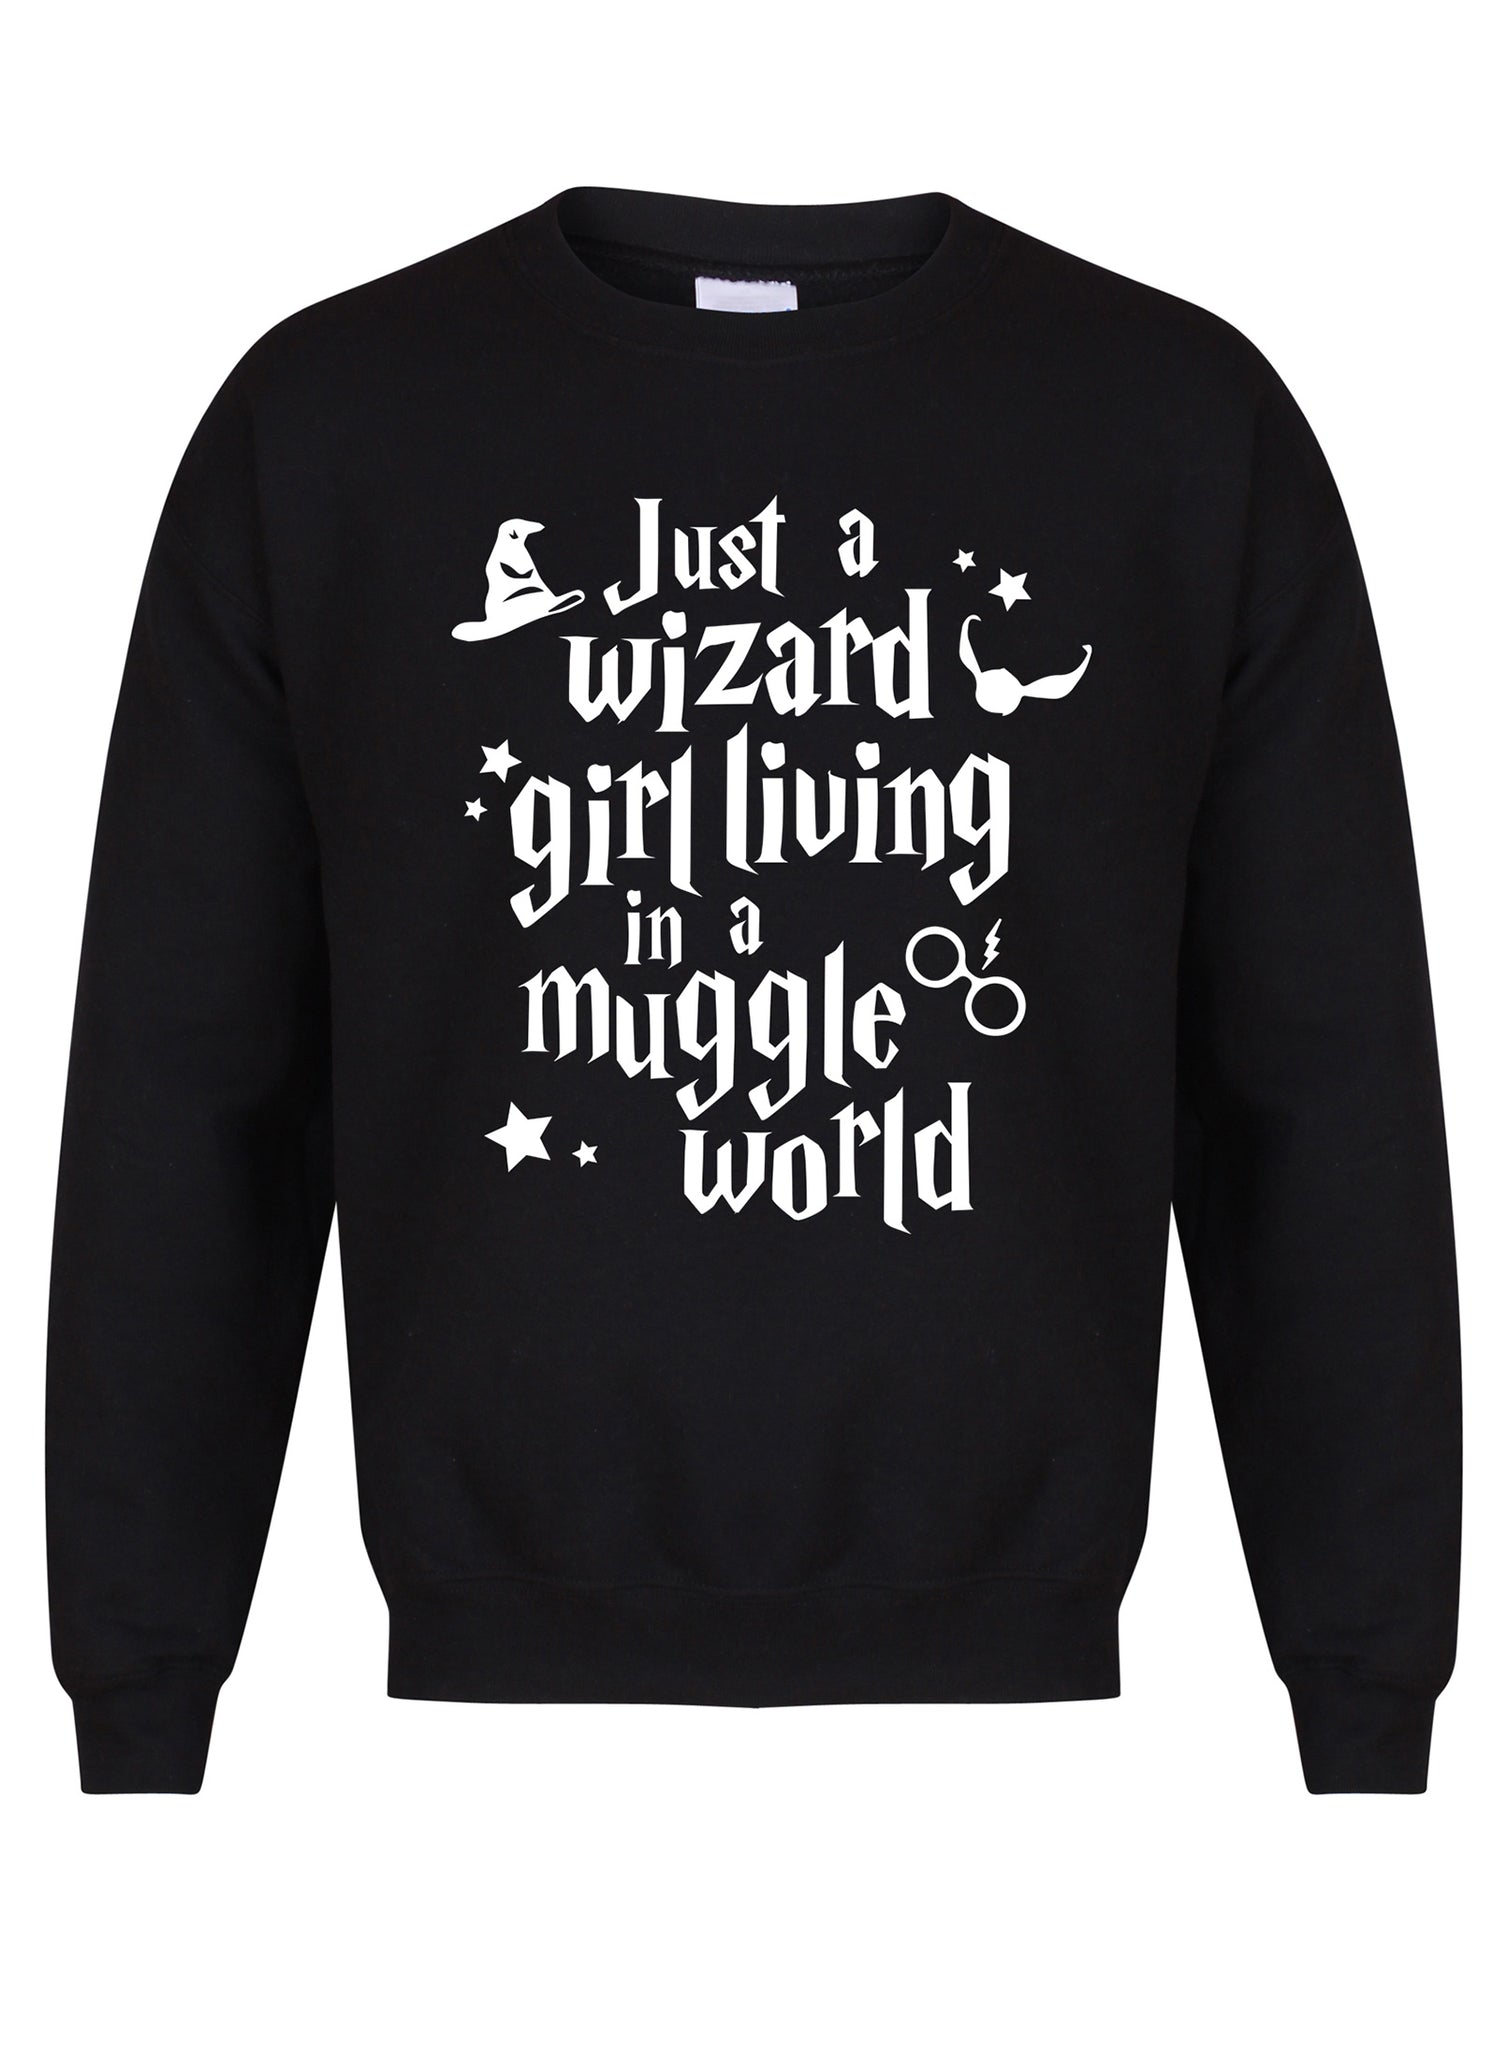 Just a Wizard Girl Living In a Muggle World - Unisex Fit Sweater